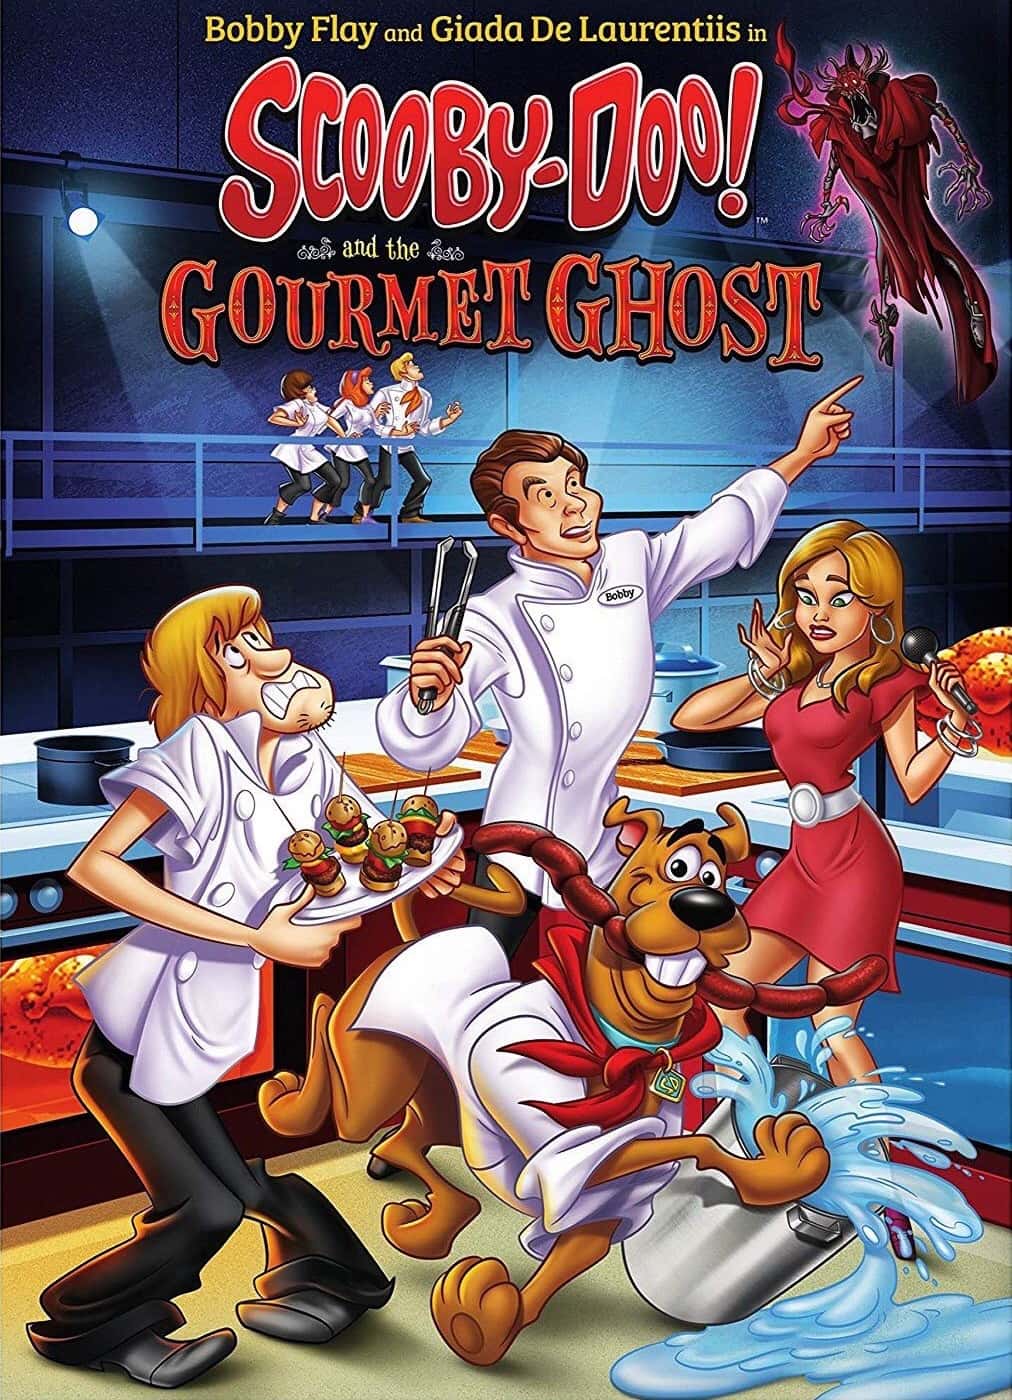 Scooby-Doo! and the Gourmet Ghost (2018) ซับไทย